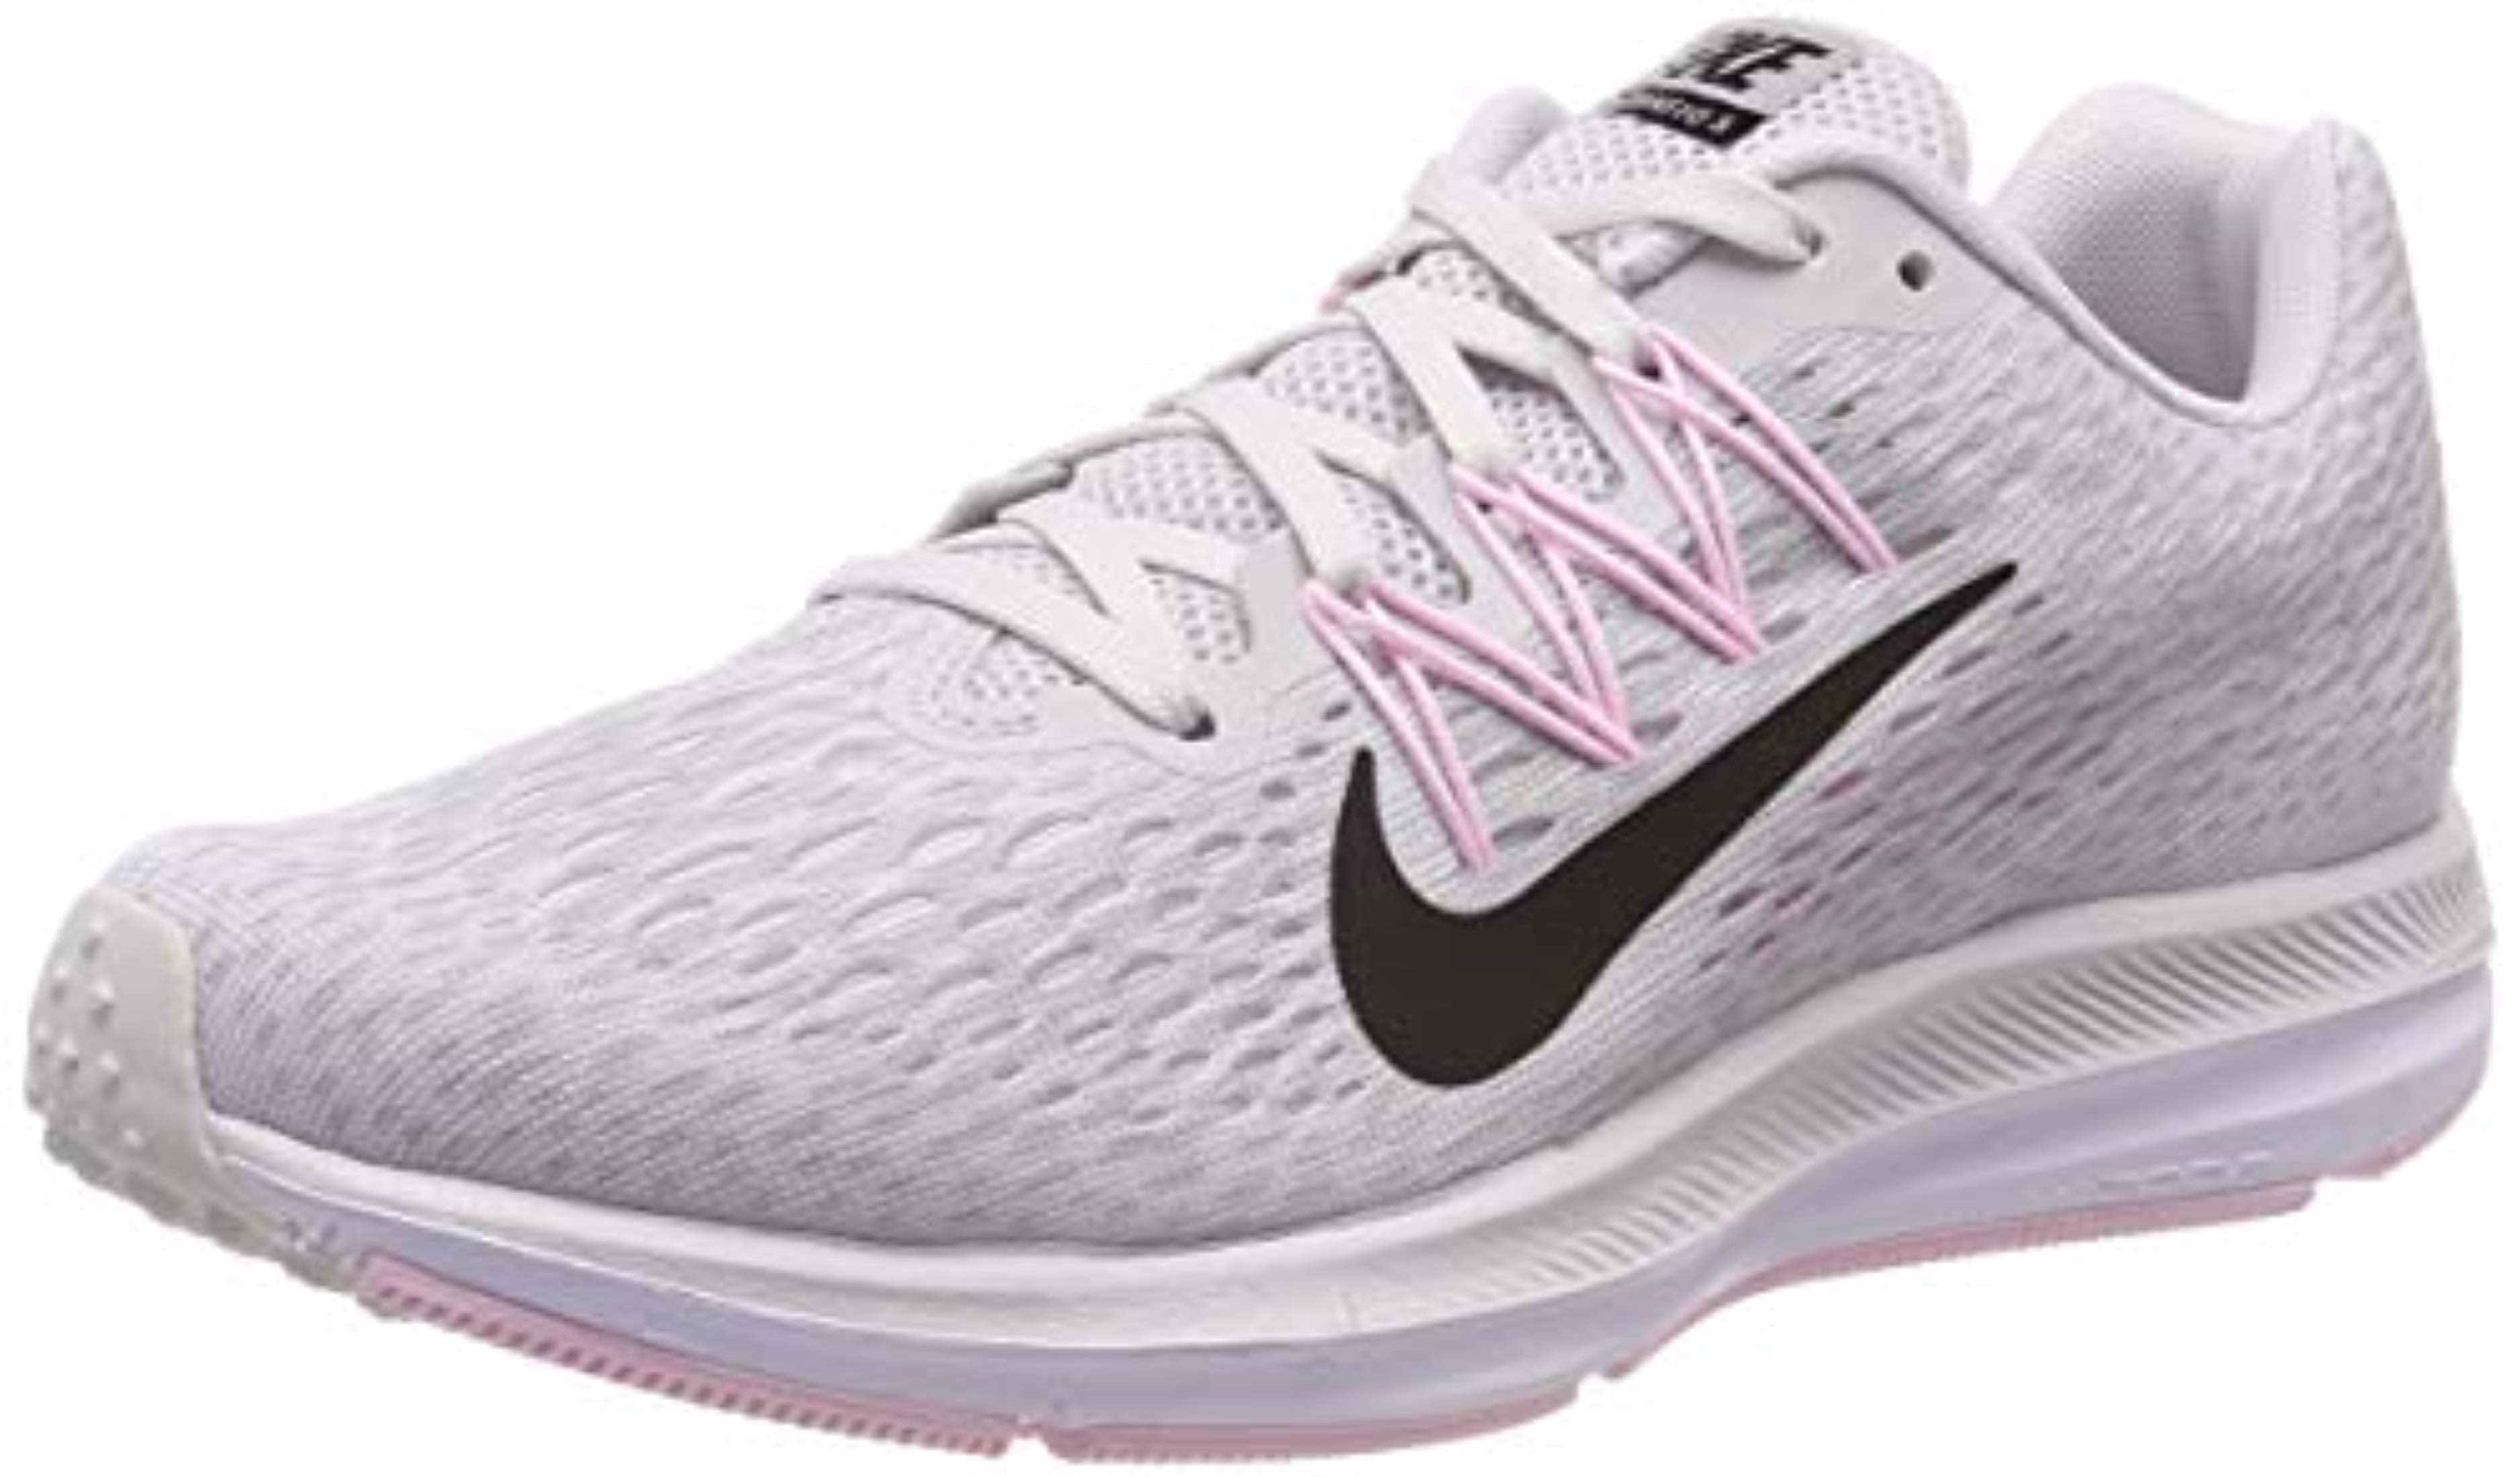 nike running shoes grey and pink